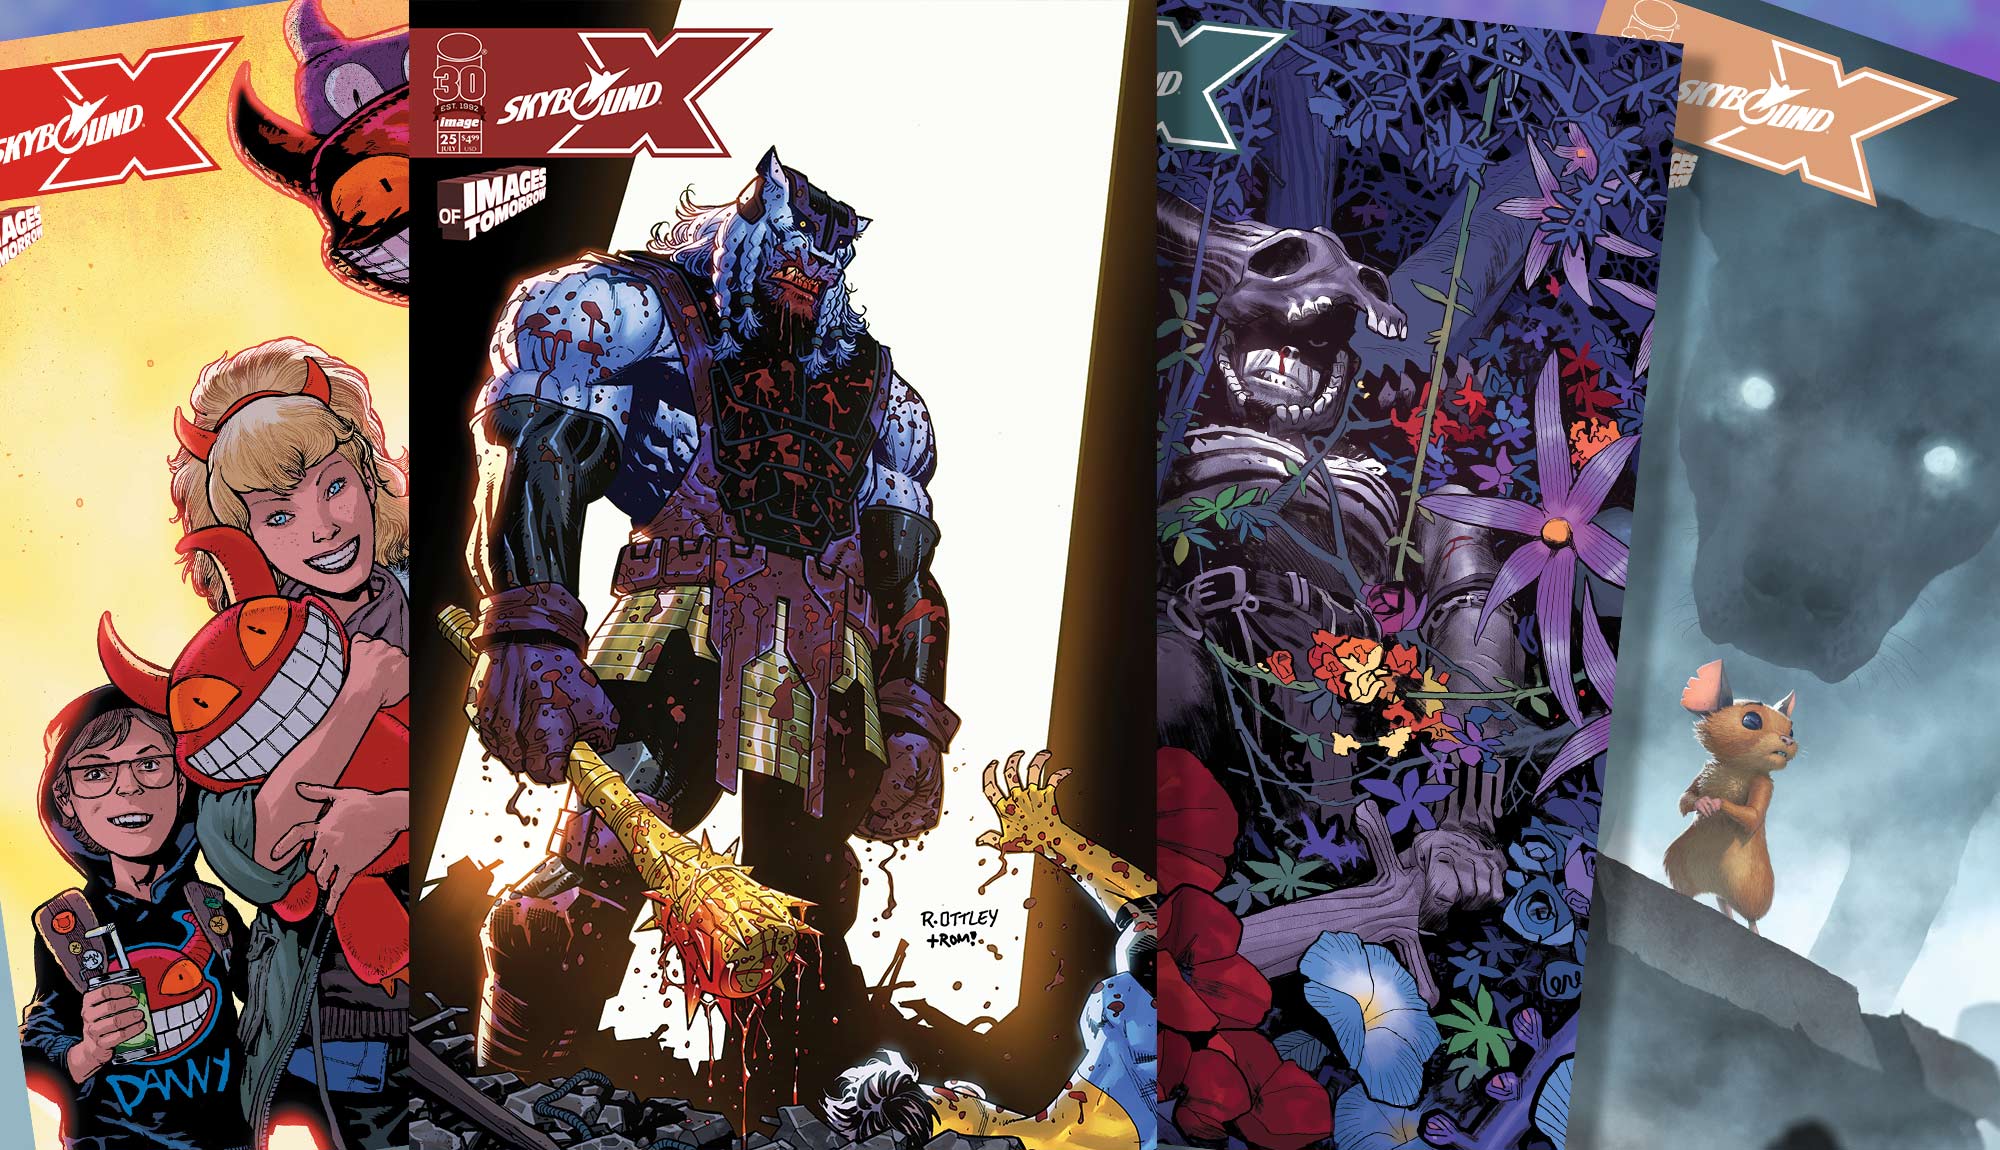 Special Preview of This Summer’s SKYBOUND X #25!